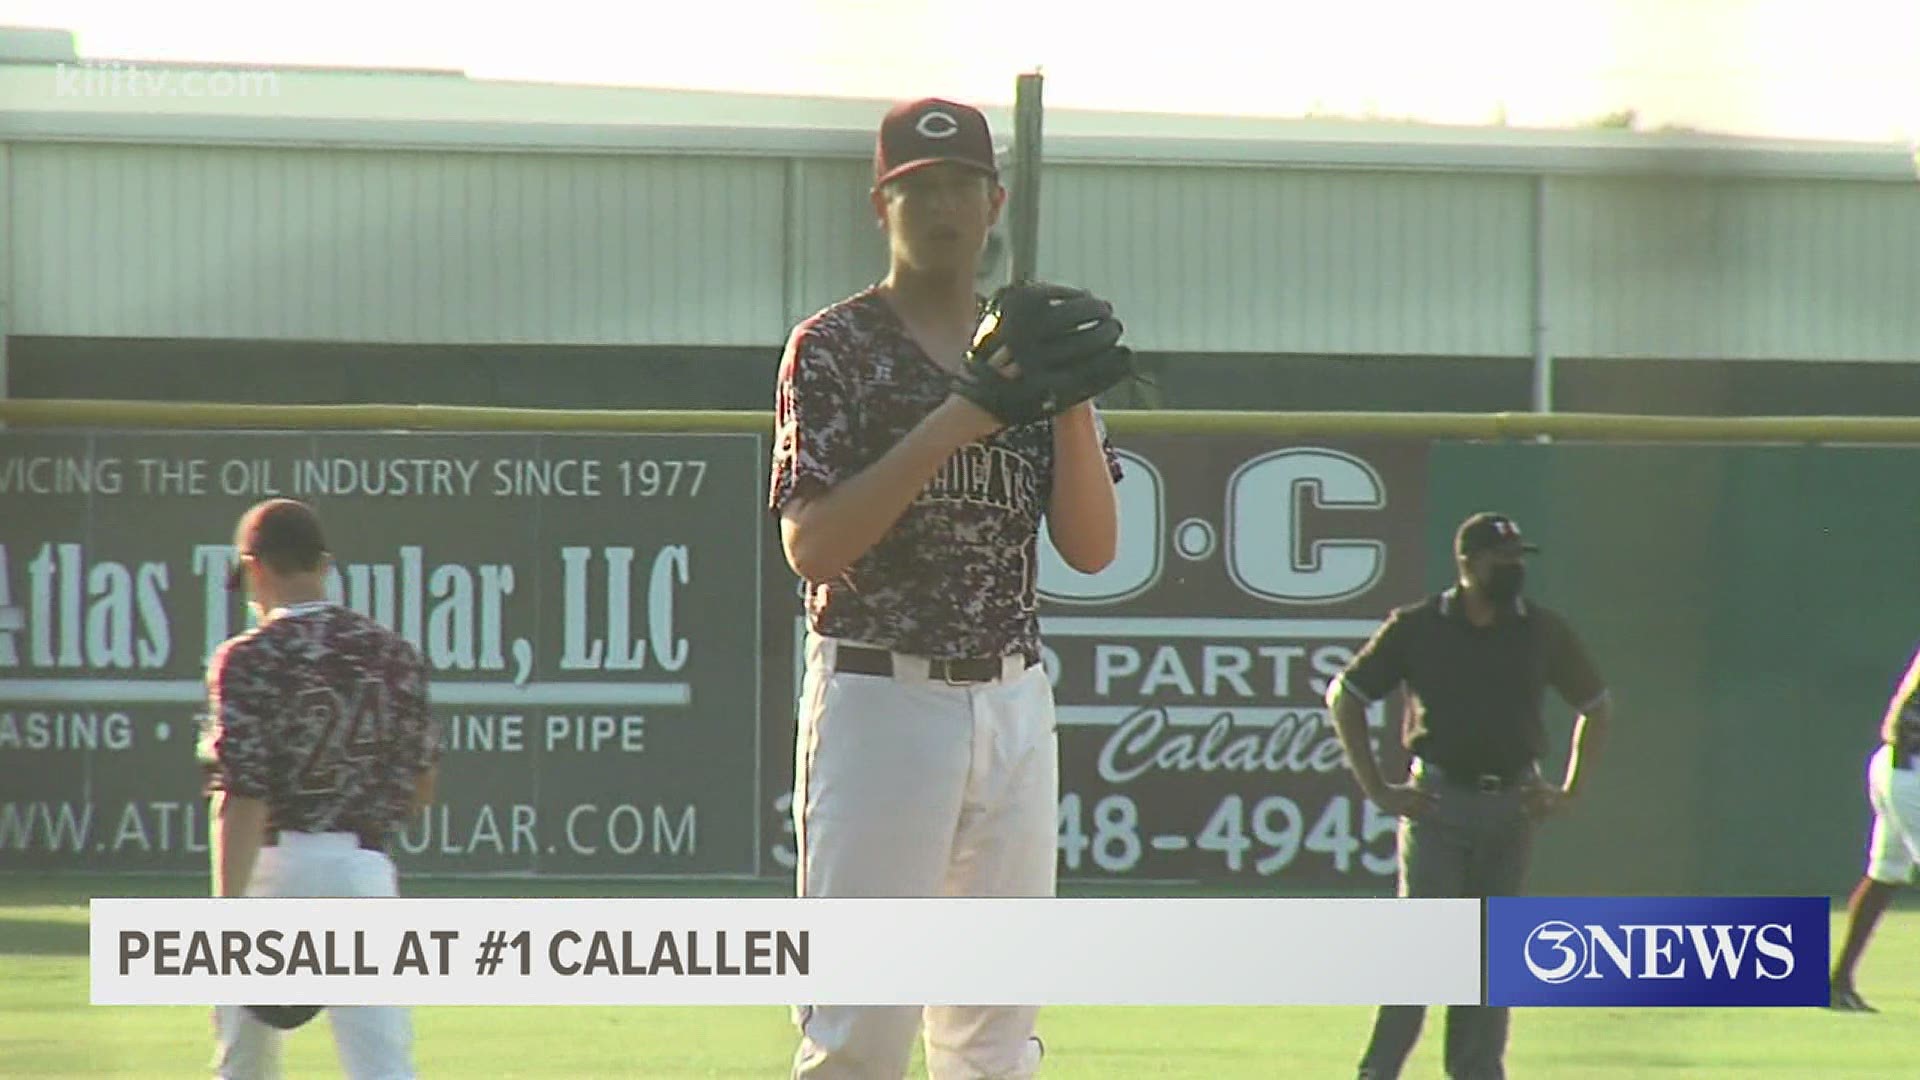 Justin Lamkin had a perfect game broken up in the fifth inning, but the 'Cats still were able to run-rule Pearsall 11-0 in five inning to advance to the third round.